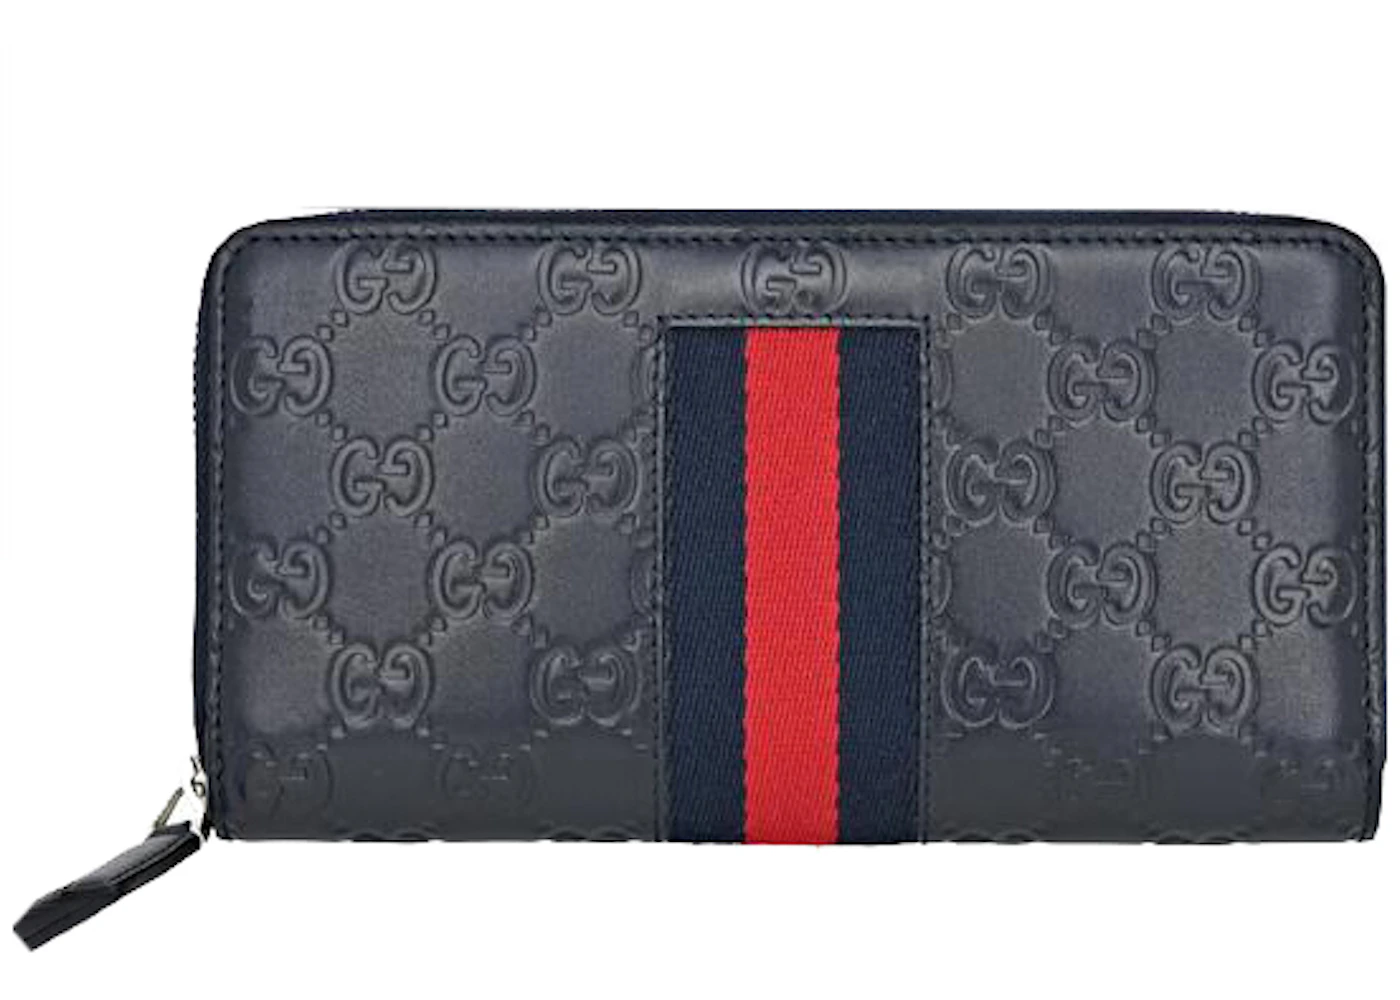 Gucci Signature Web Zip Around Wallet Navy Blue in Leather with Silver ...